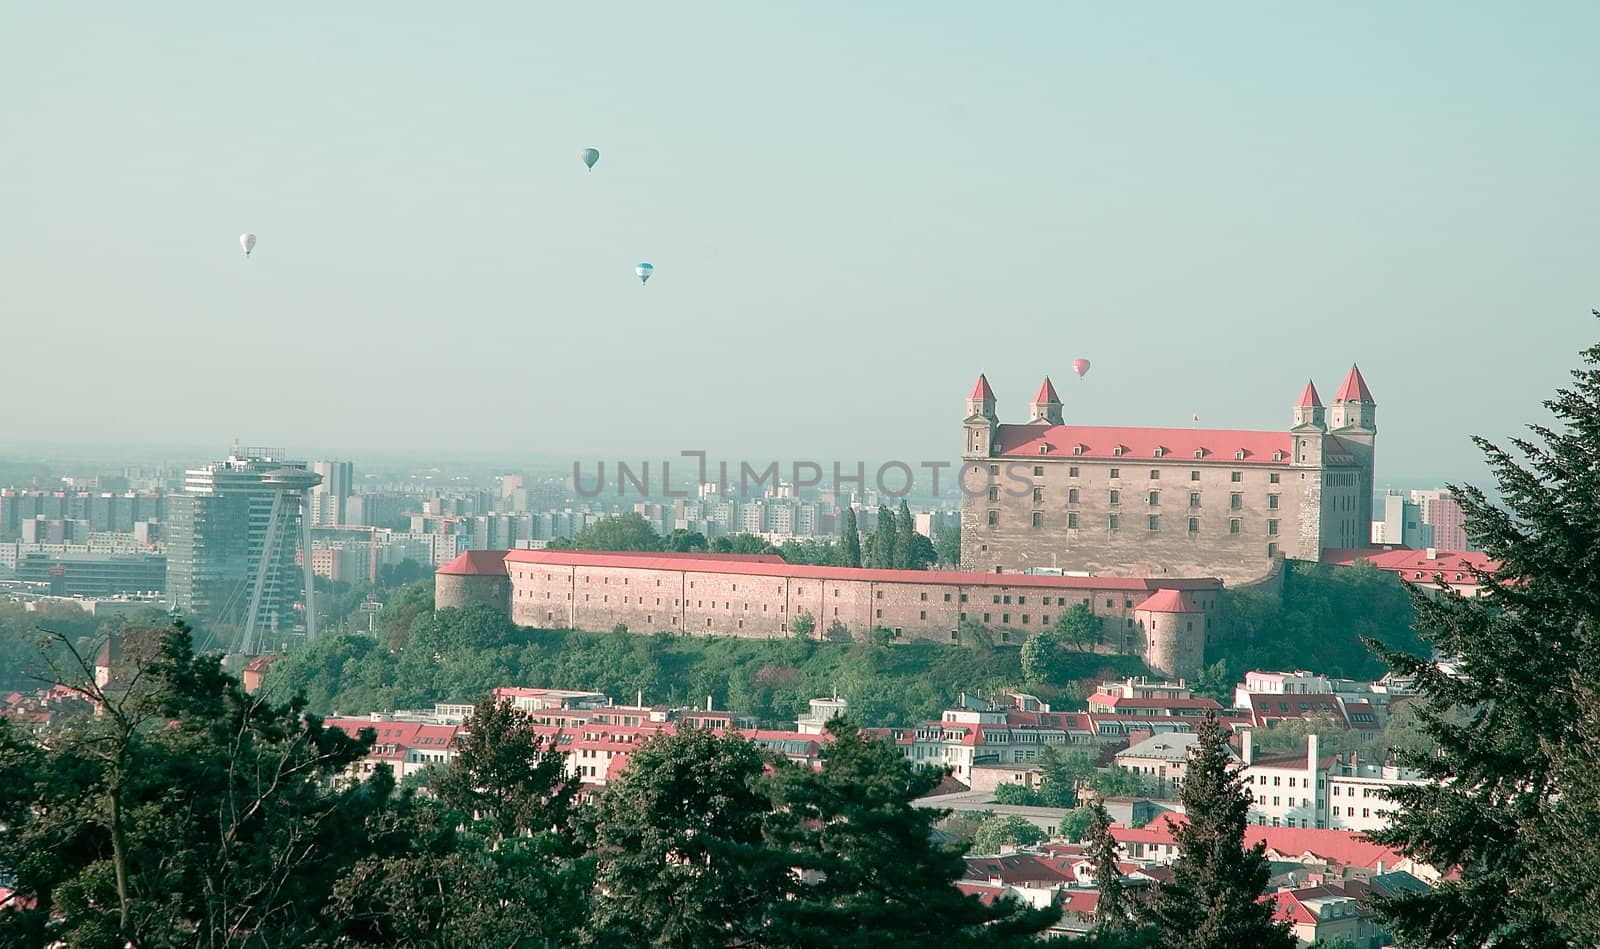 famous bratislava castle, flying balloons in background, cold autumn colors